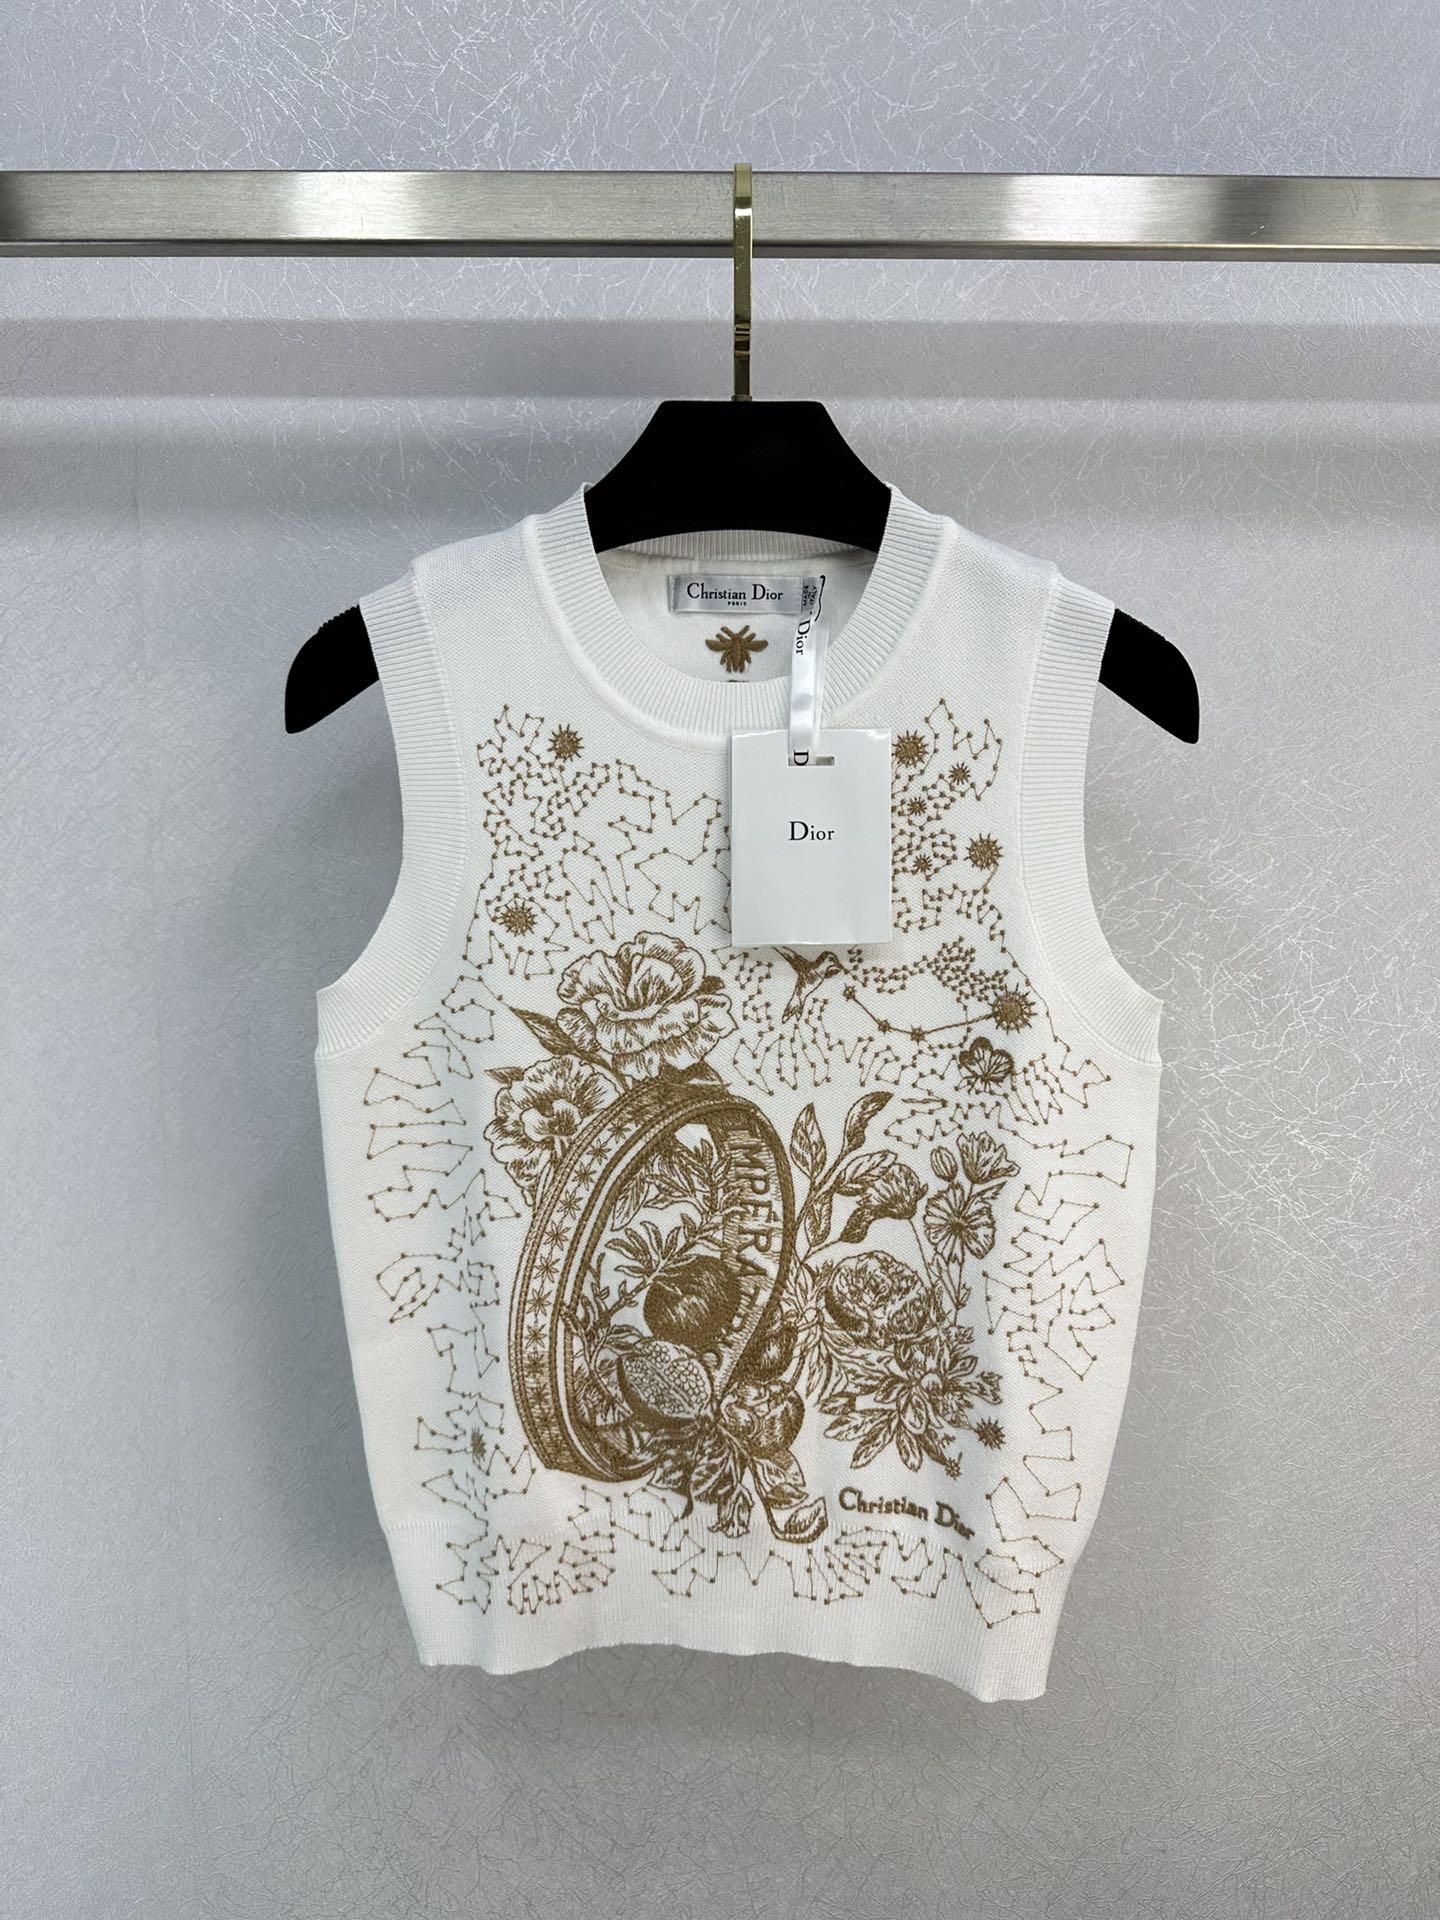 Dior Clothing Tank Tops&Camis White Embroidery Knitting Spring/Summer Collection